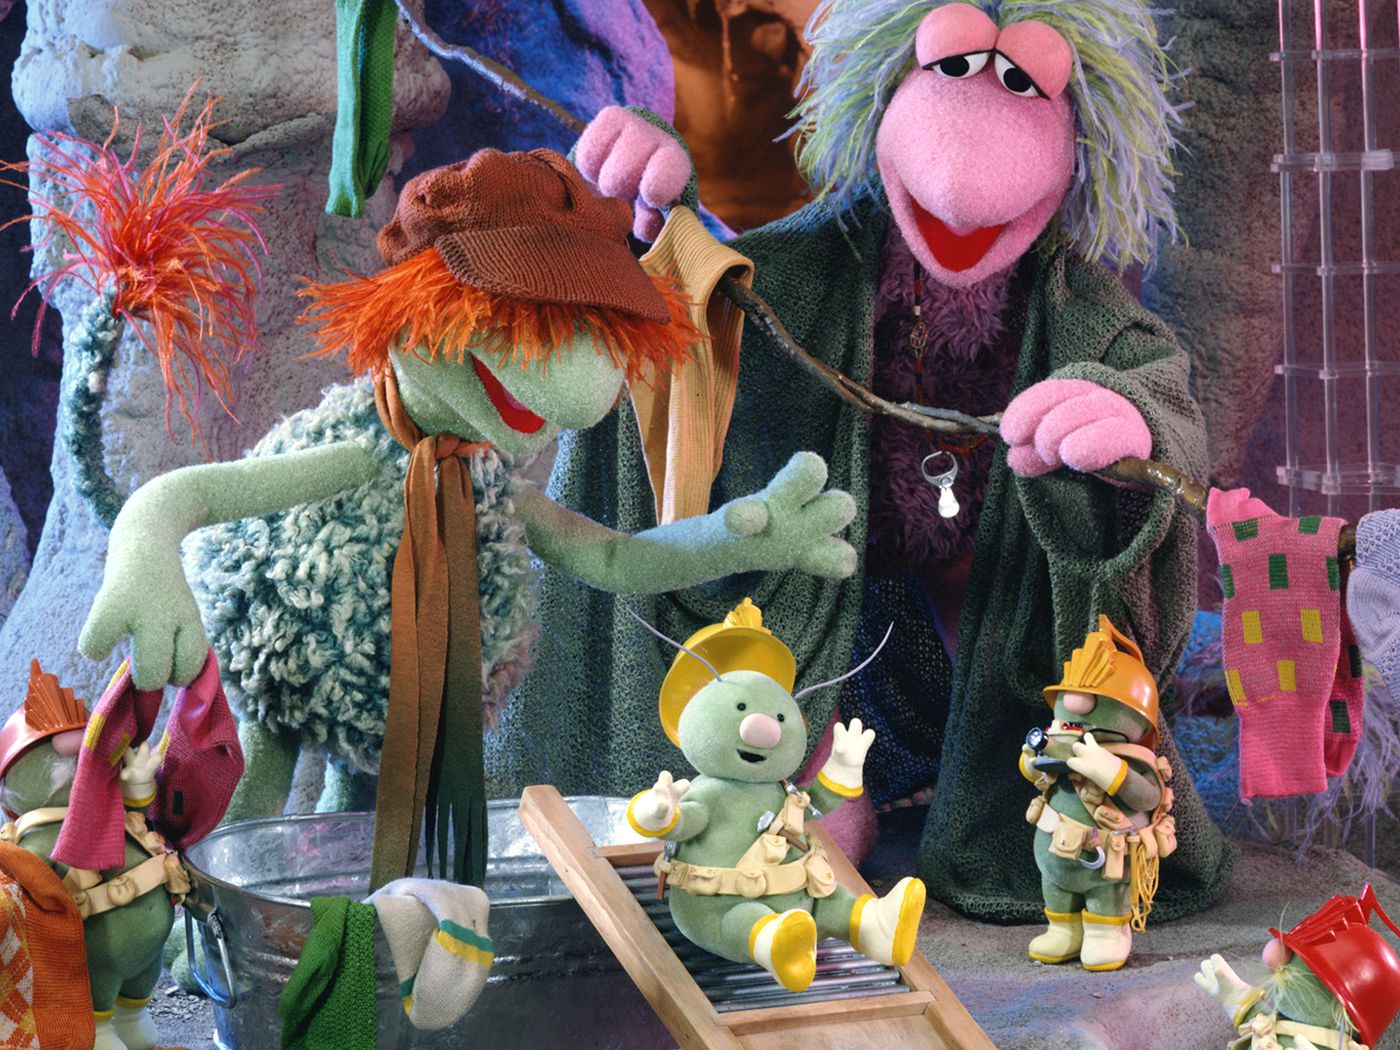 Netflix's new Dark Crystal reboot reaches back to the fantasy of Fraggle Rock